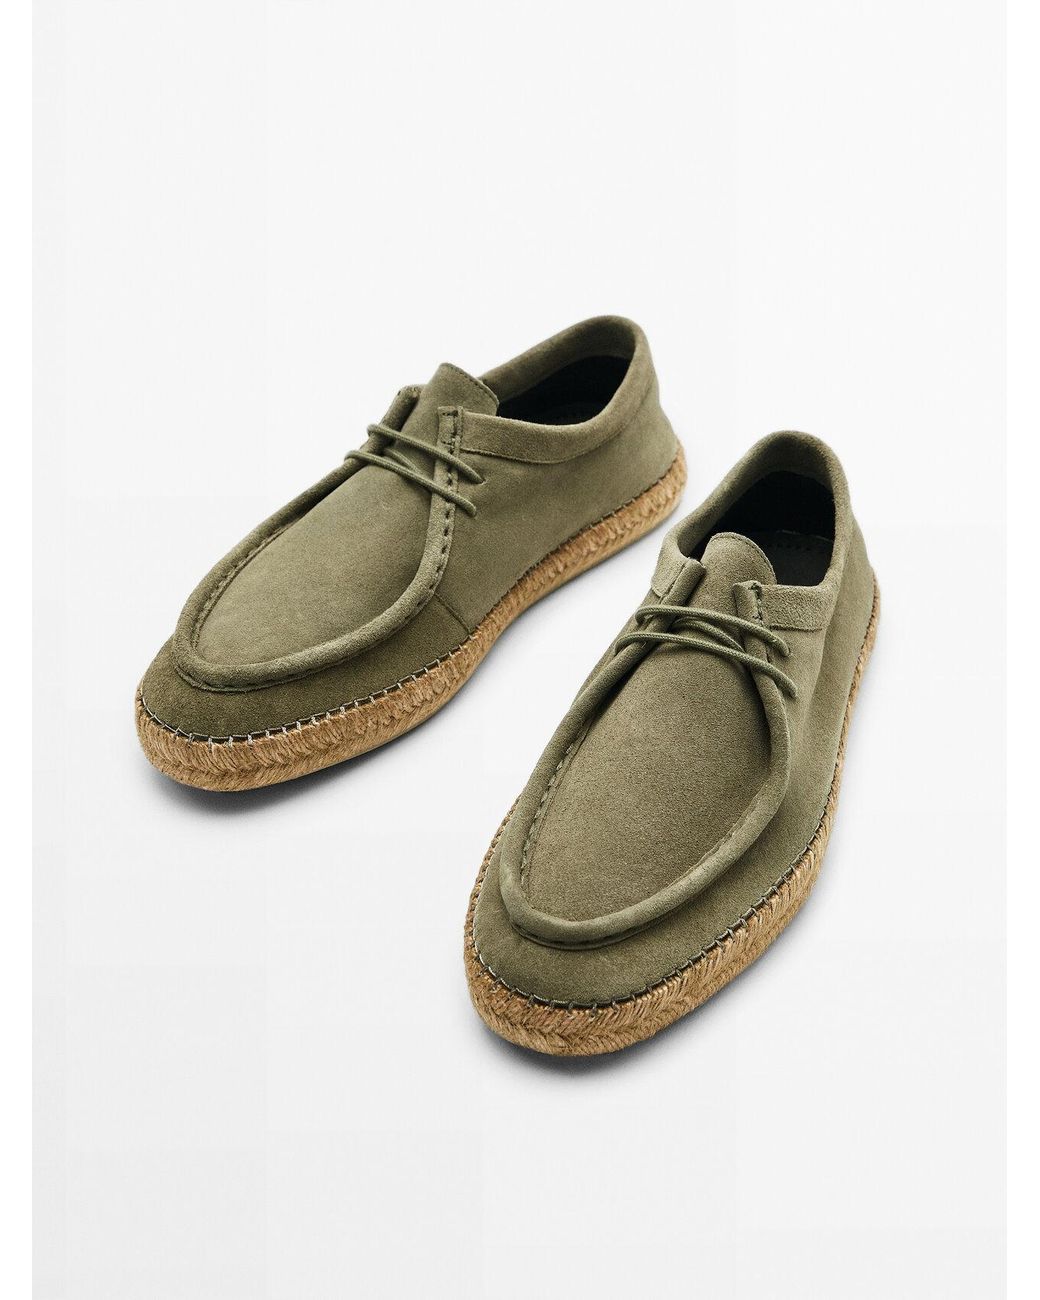 Natural World Dalton 8192 leather and jute shoes for men-cheohanoi.vn